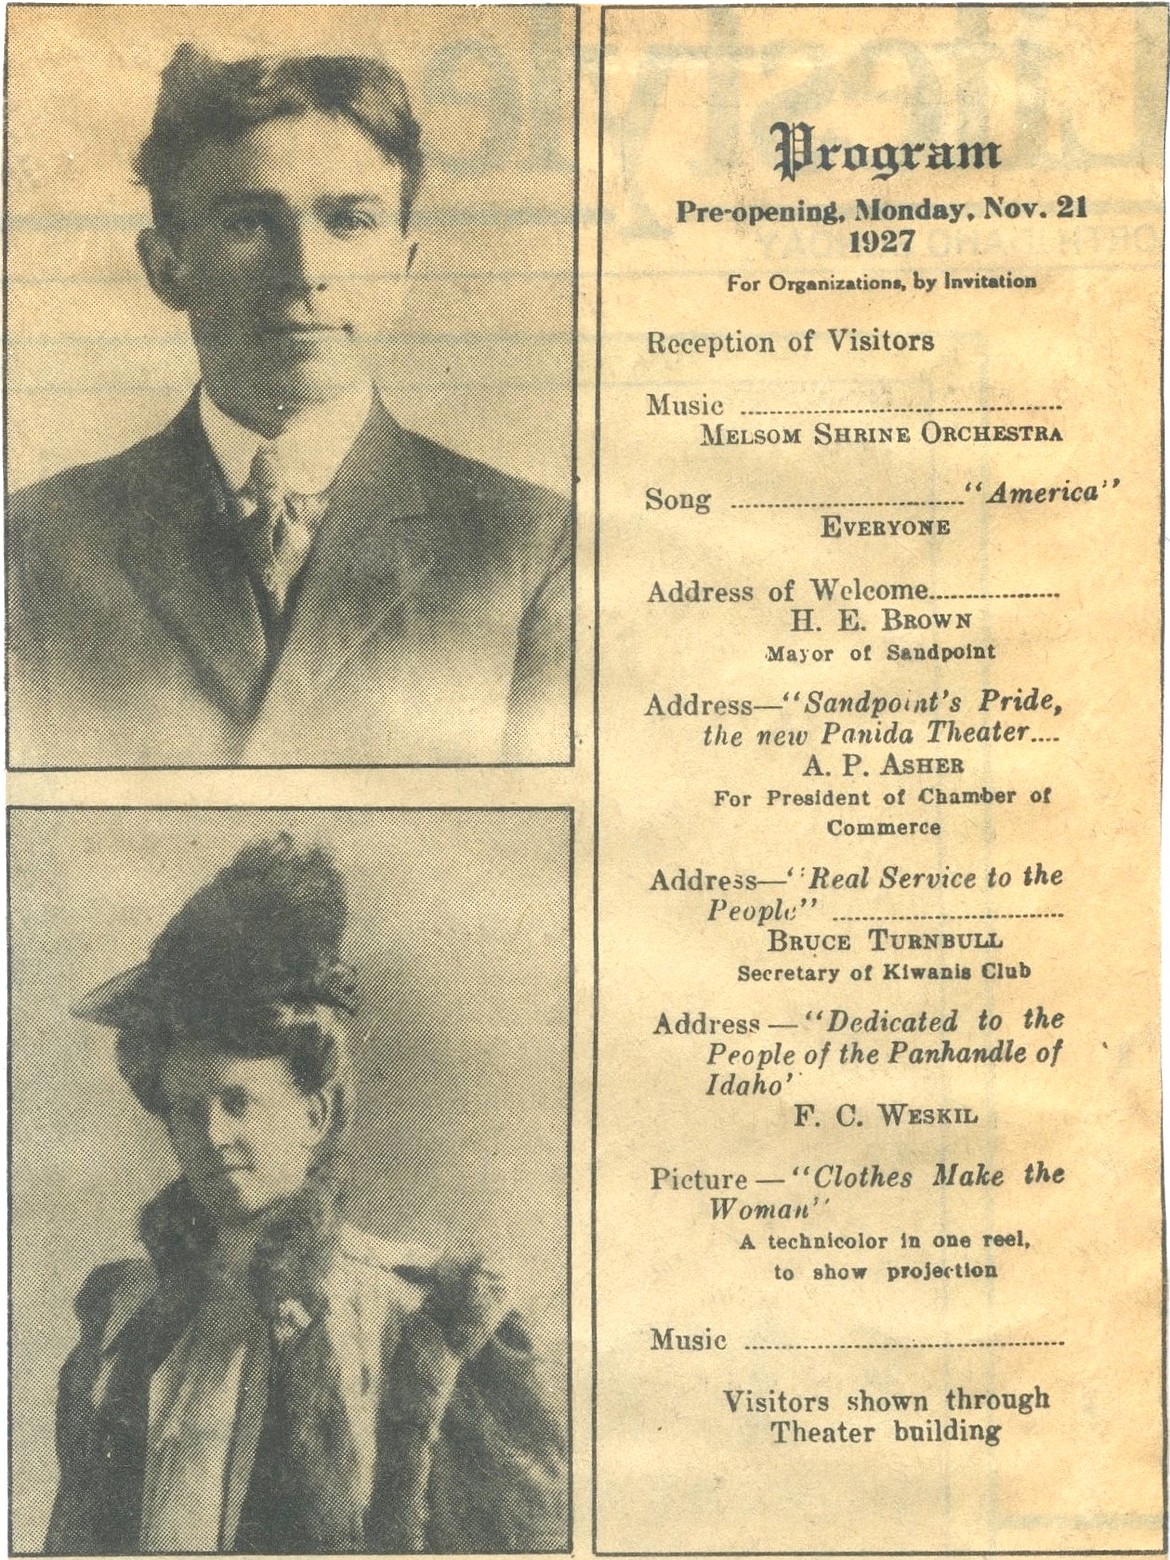 A 1927 program shows Mr. and Mrs. F.C. Weskil.